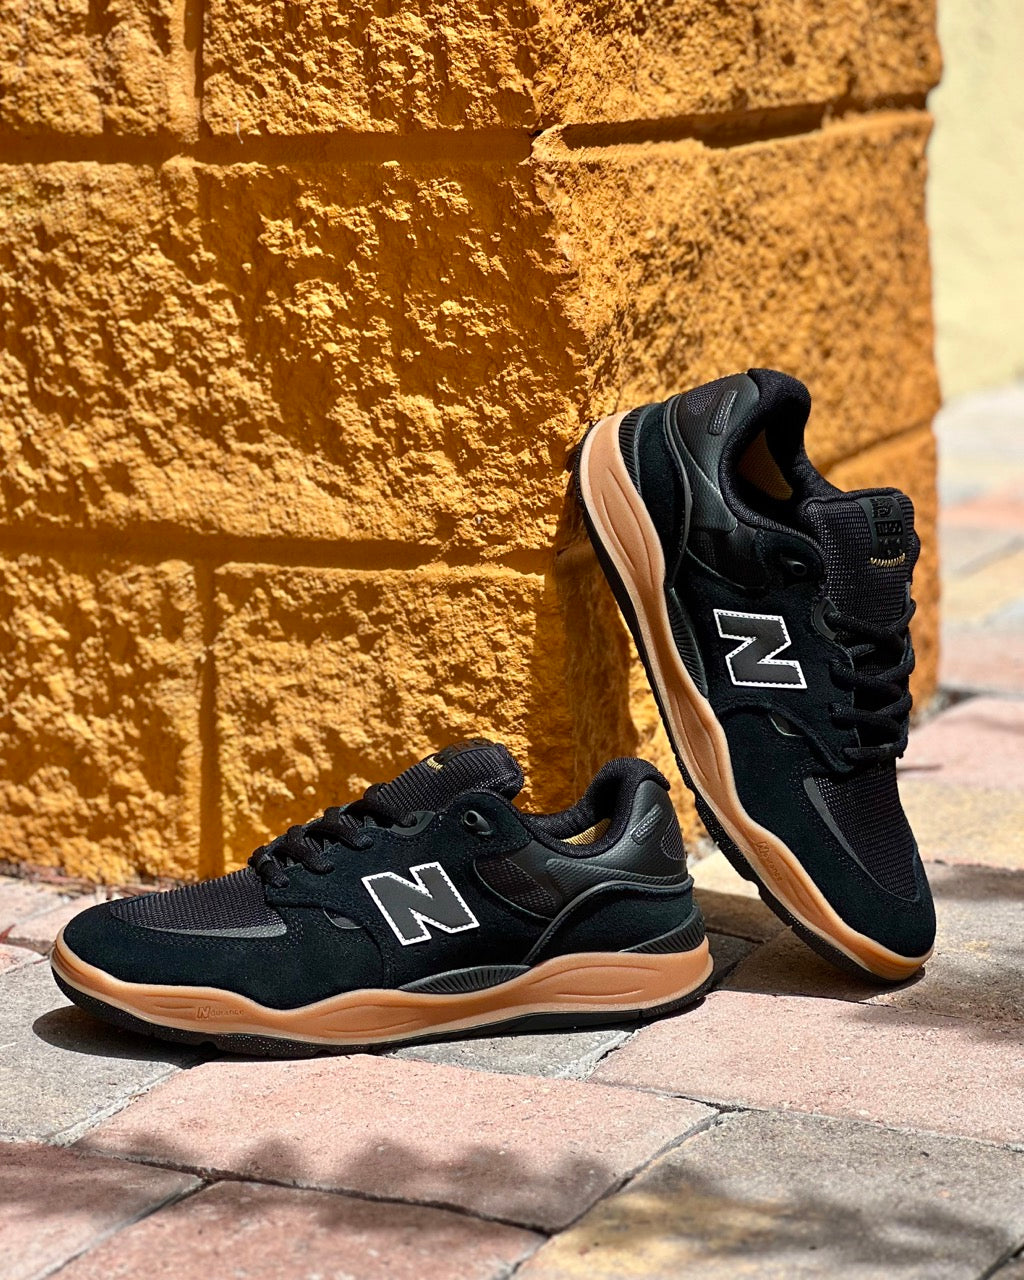 Image of the New Balance Numeric Tiago Lemos 1010 Skate Shoes in Black Gum sitting up next to a brick wall. 